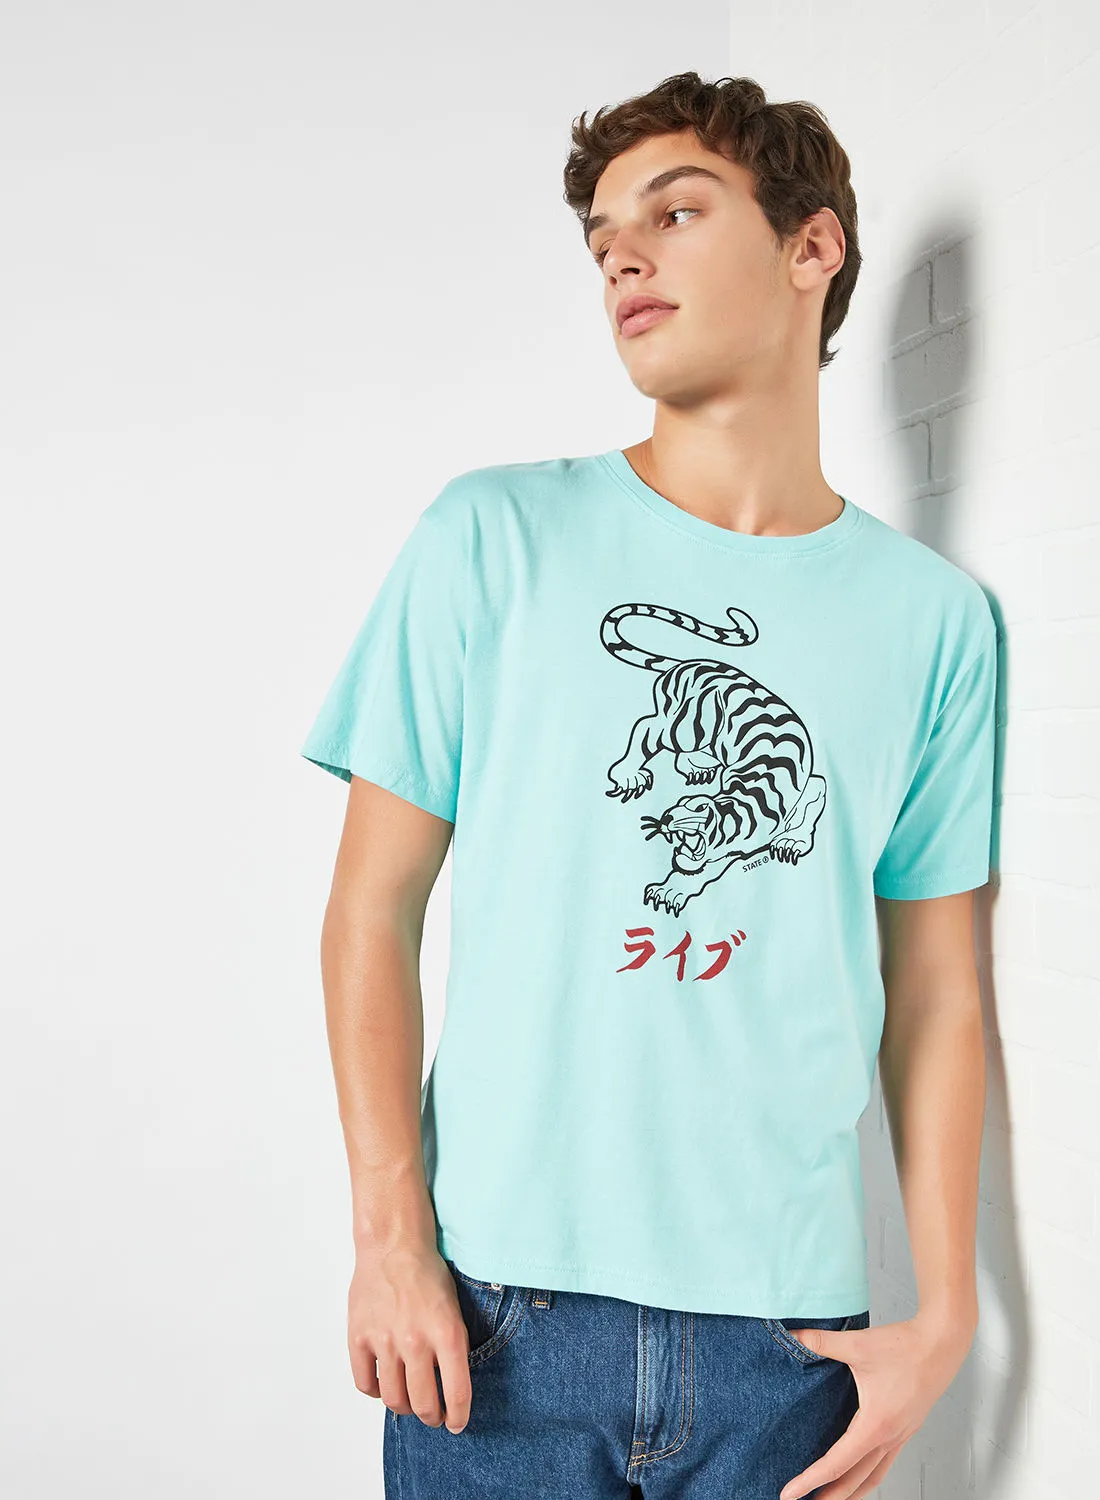 STATE 8 Tiger Graphic Print T-Shirt Mint Blue